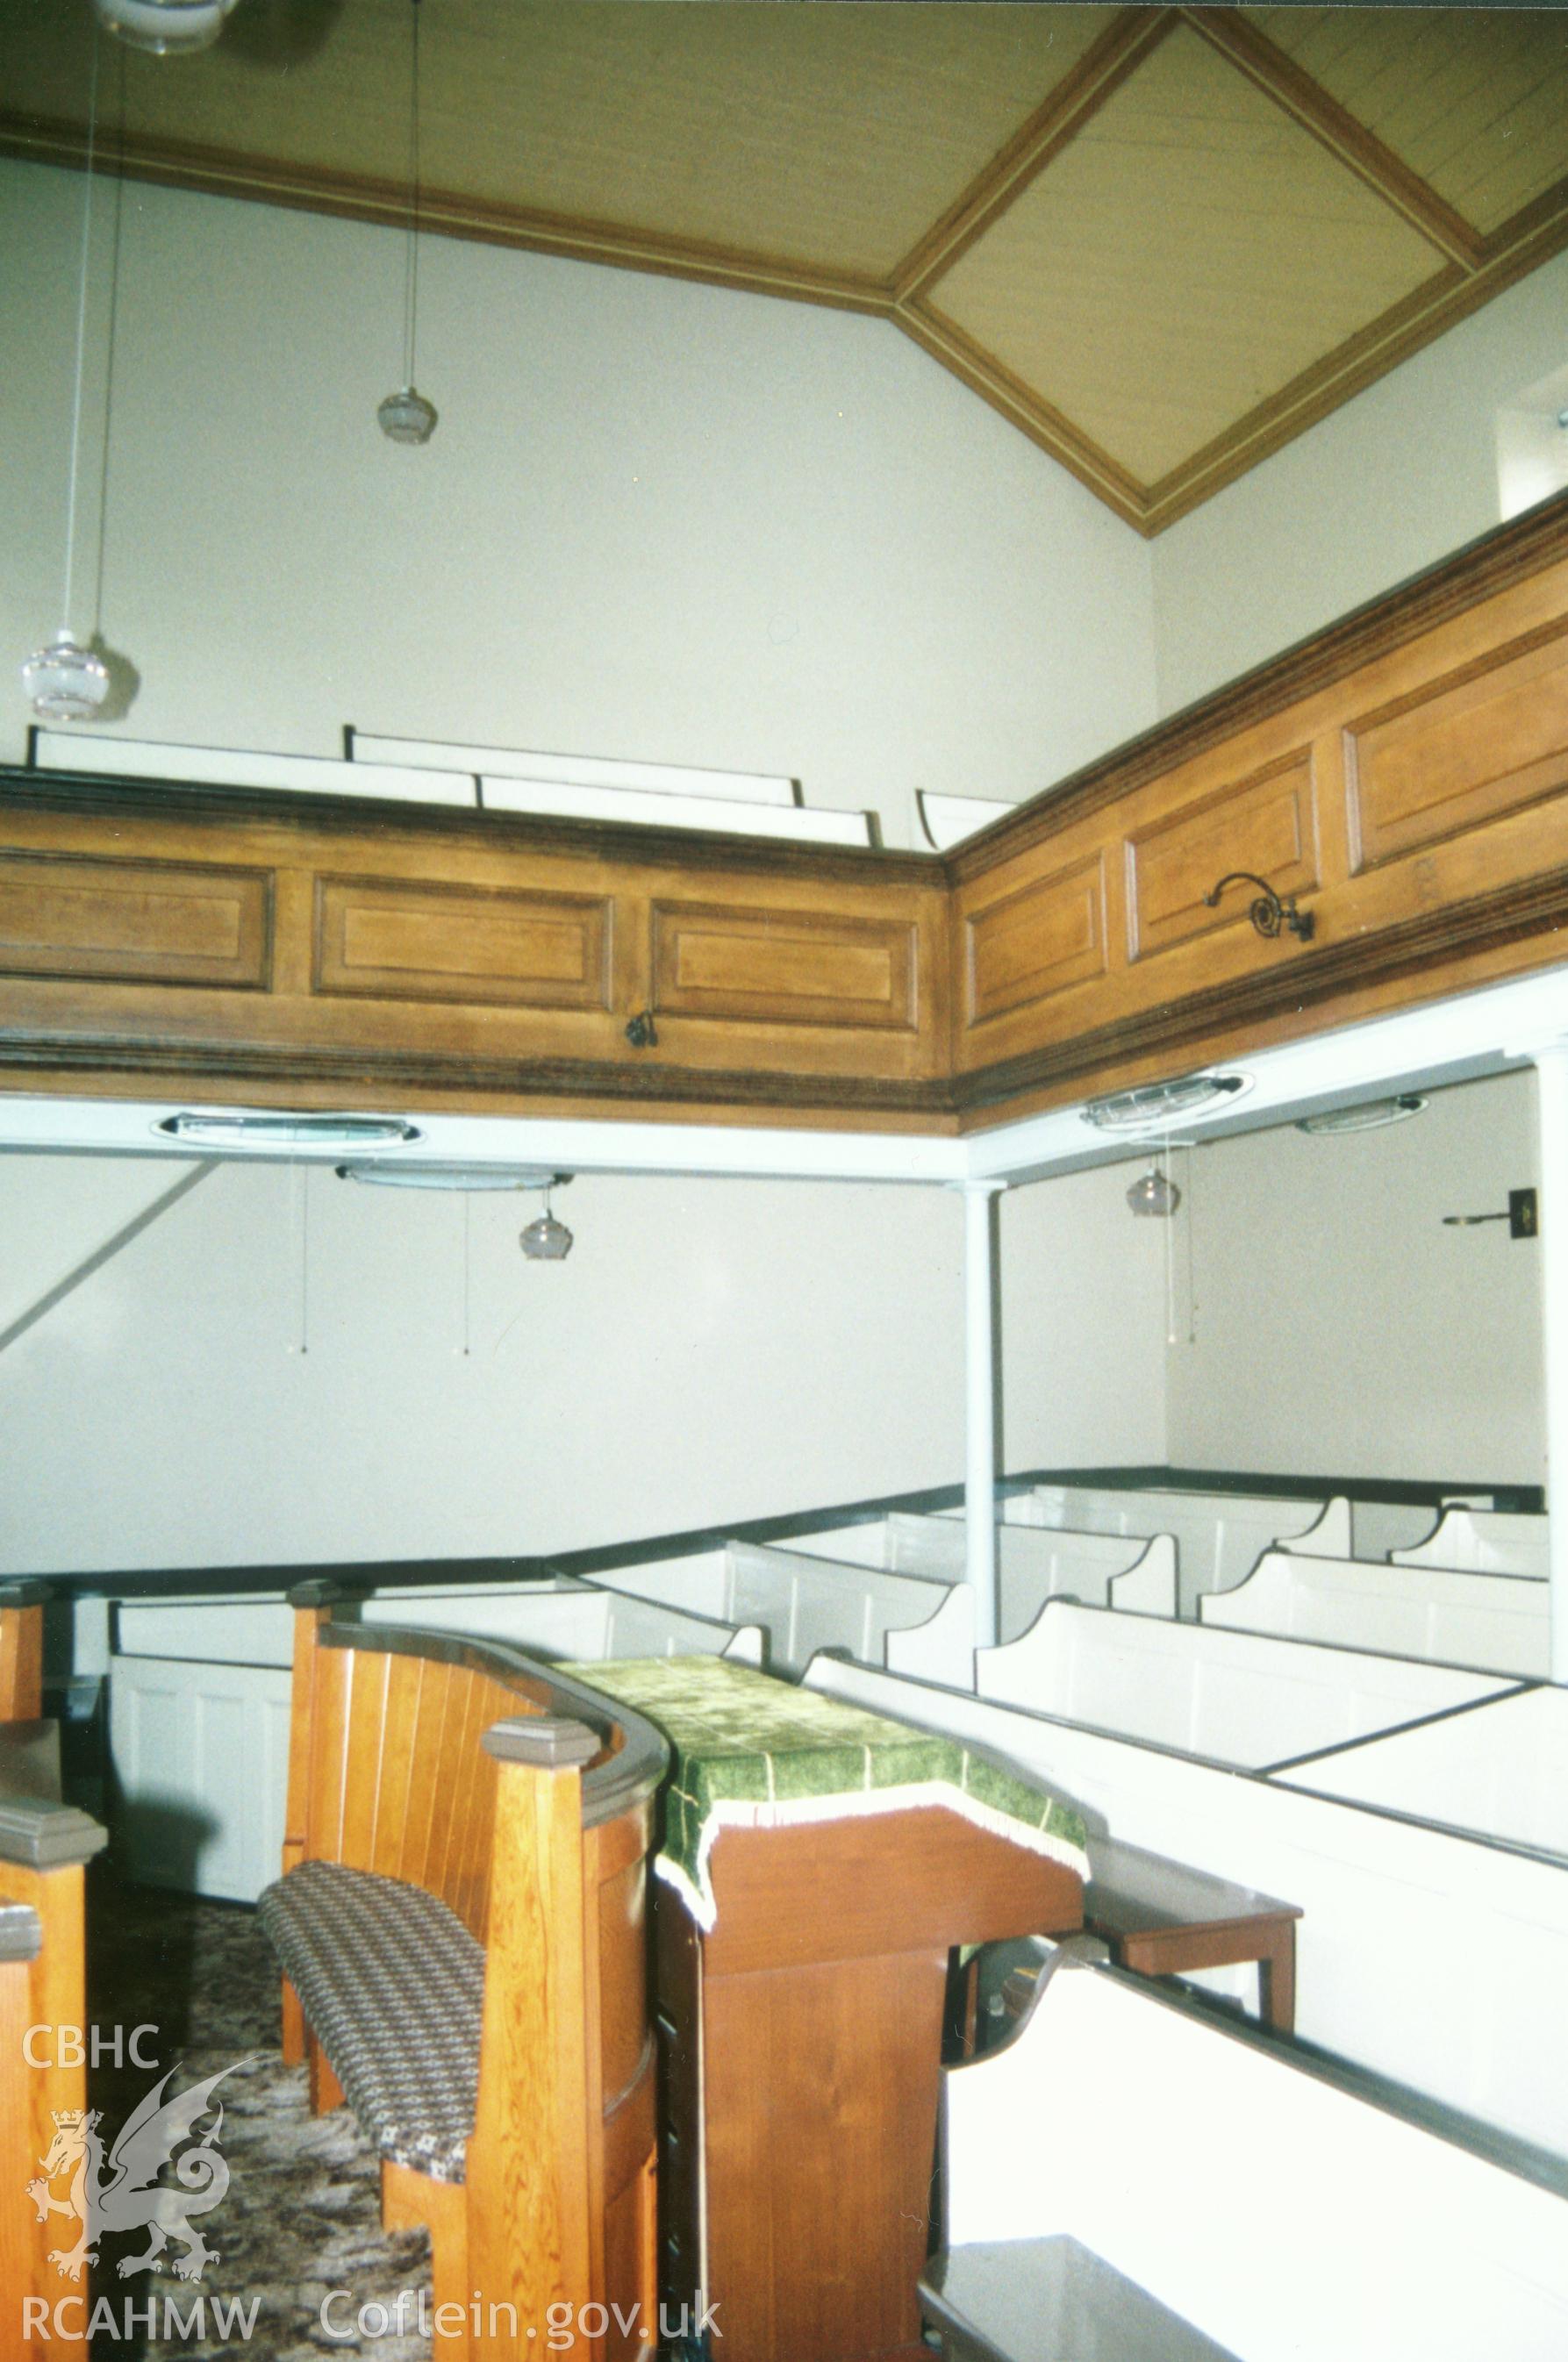 Digital copy of a colour photograph showing an interior view of Nanternis Welsh Independent Chapel, taken by Robert Scourfield, c.1996.